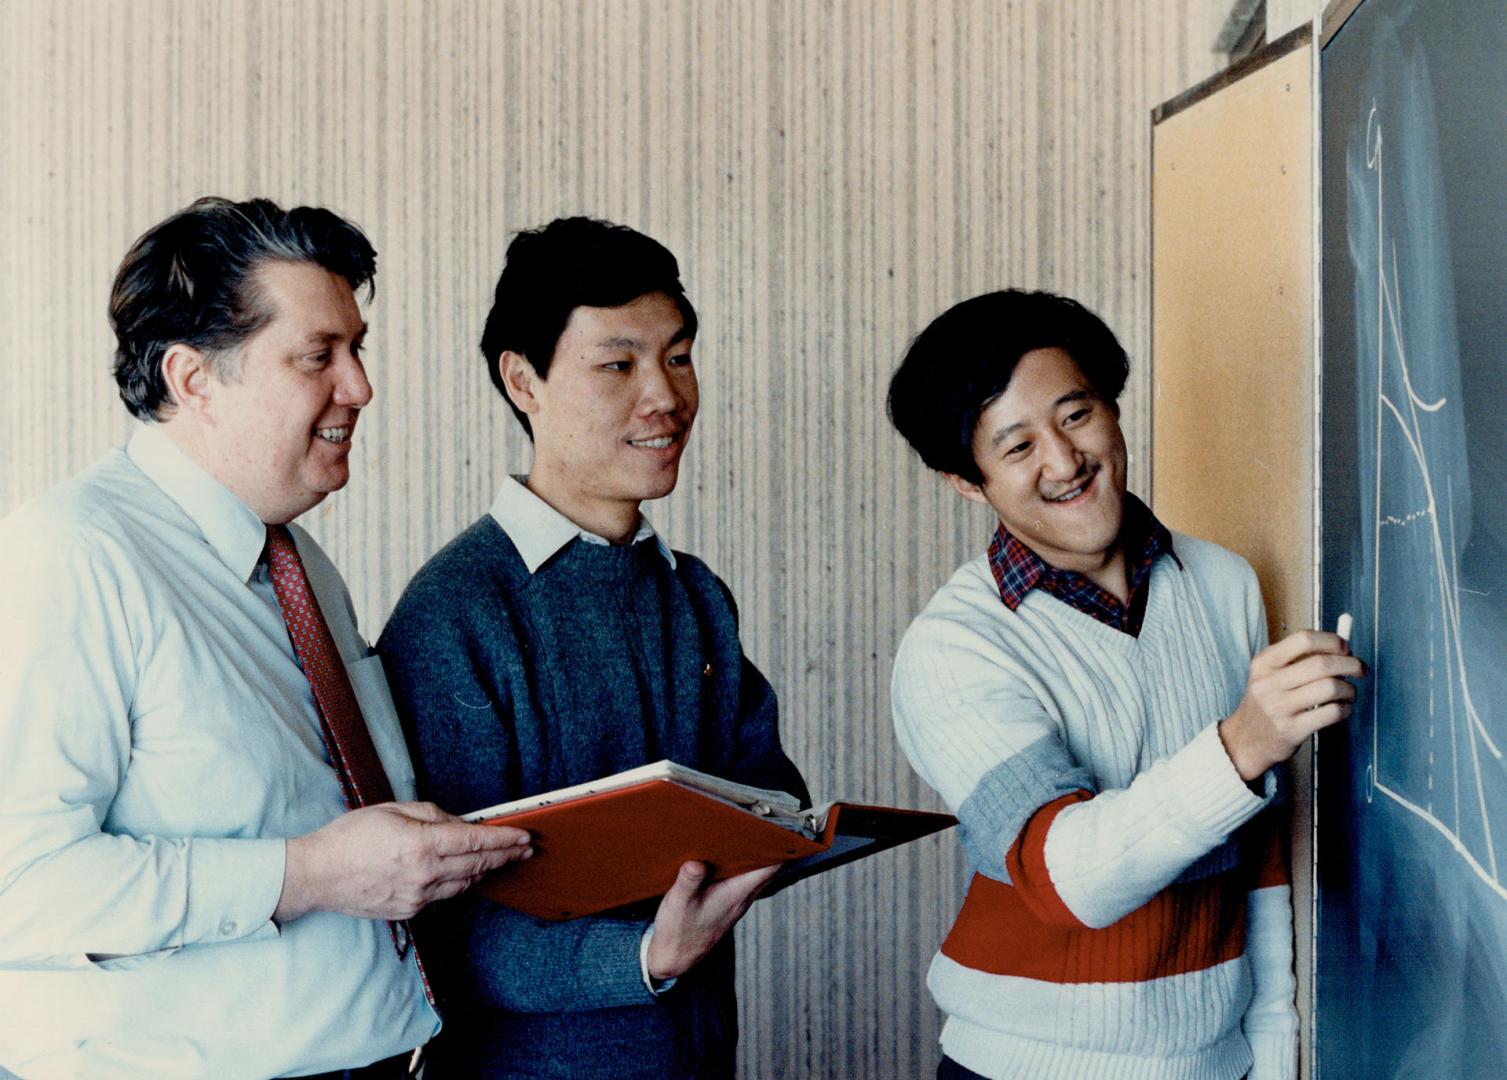 Finer points: York professor Wally Crowston, left, co-ordinator of the university's $1.3 million Canadian International Development Agency program, shows Aiang Teng, centre, and Yisong Tian the finer points of economics and management. The two will return soon to teach in China.